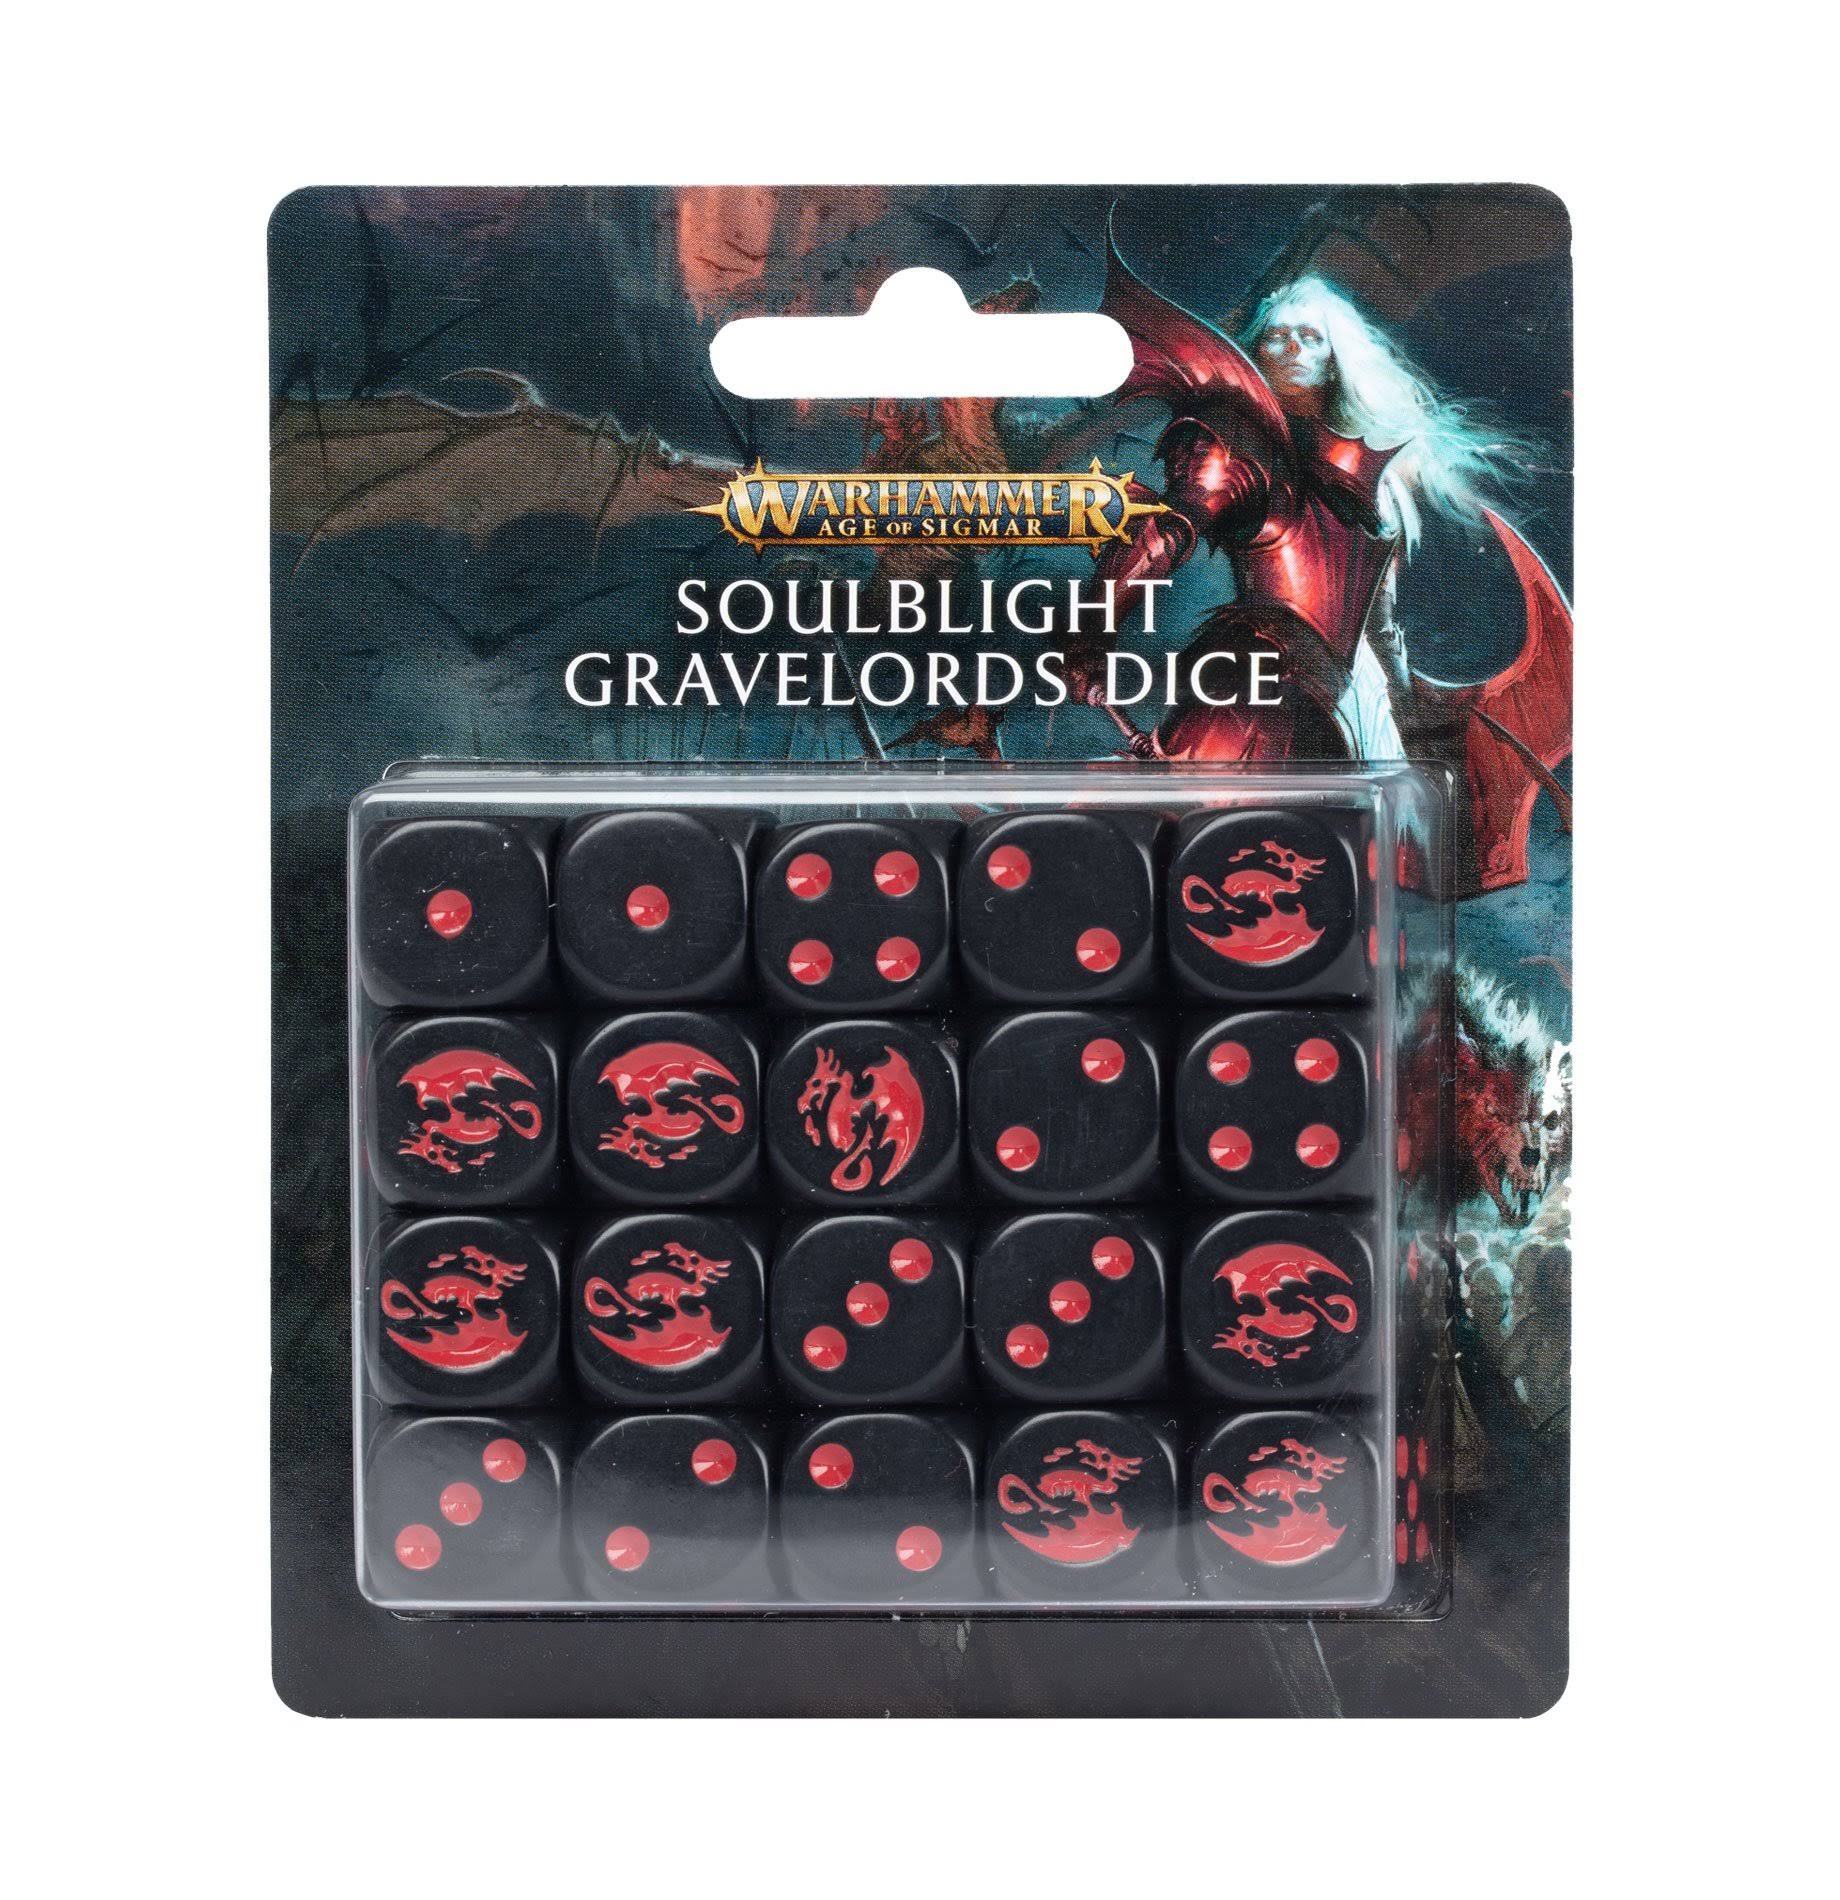 Warhammer Age of Sigmar - Soulblight Gravelords Dice